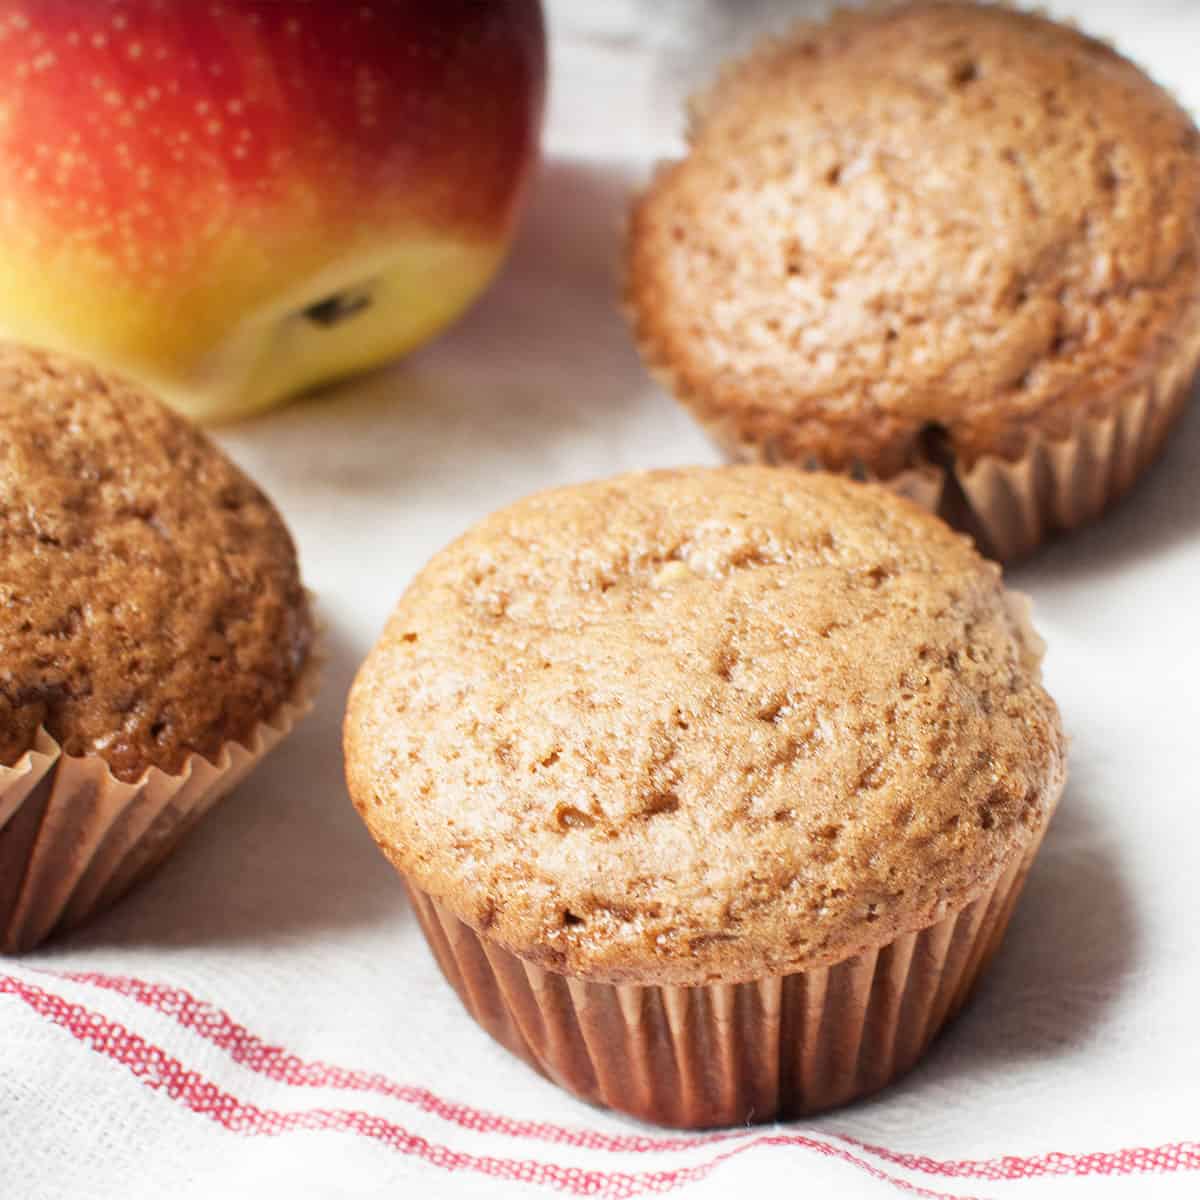 sourdough apple muffins and a red apple